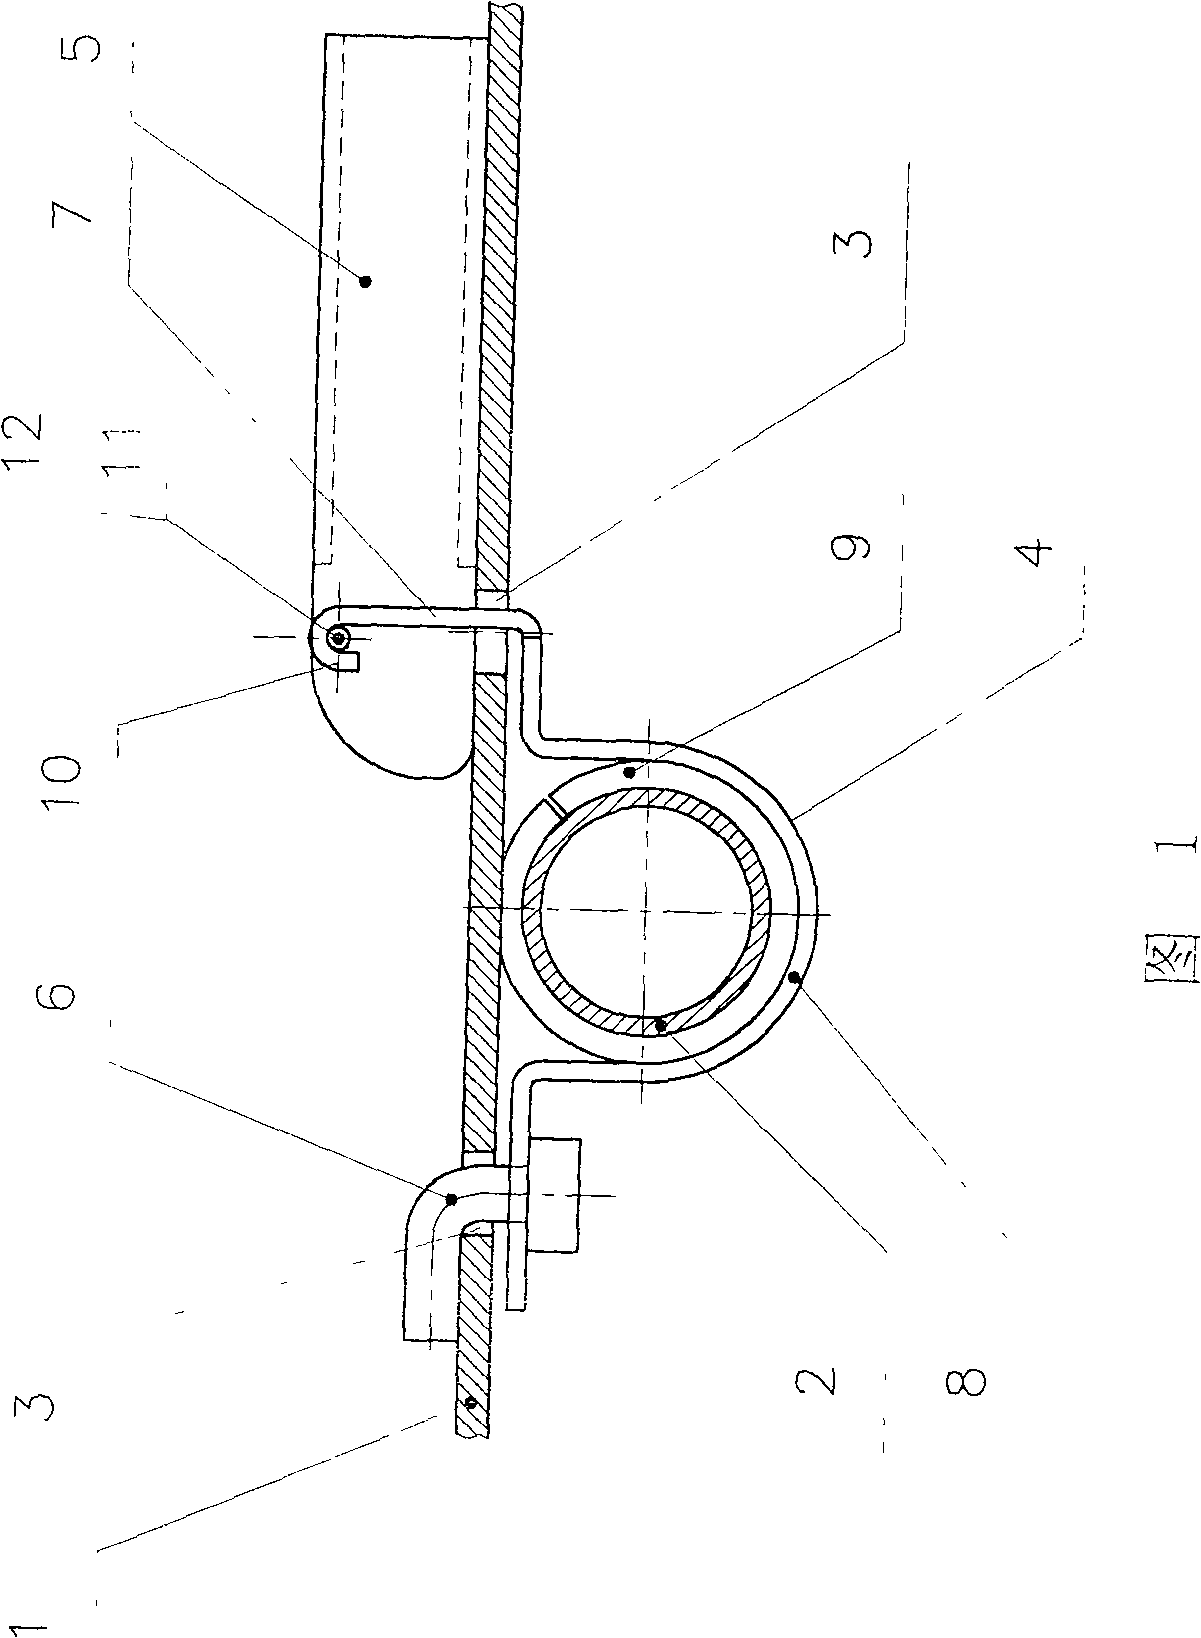 Anti-skid device for conveying electric power generator set